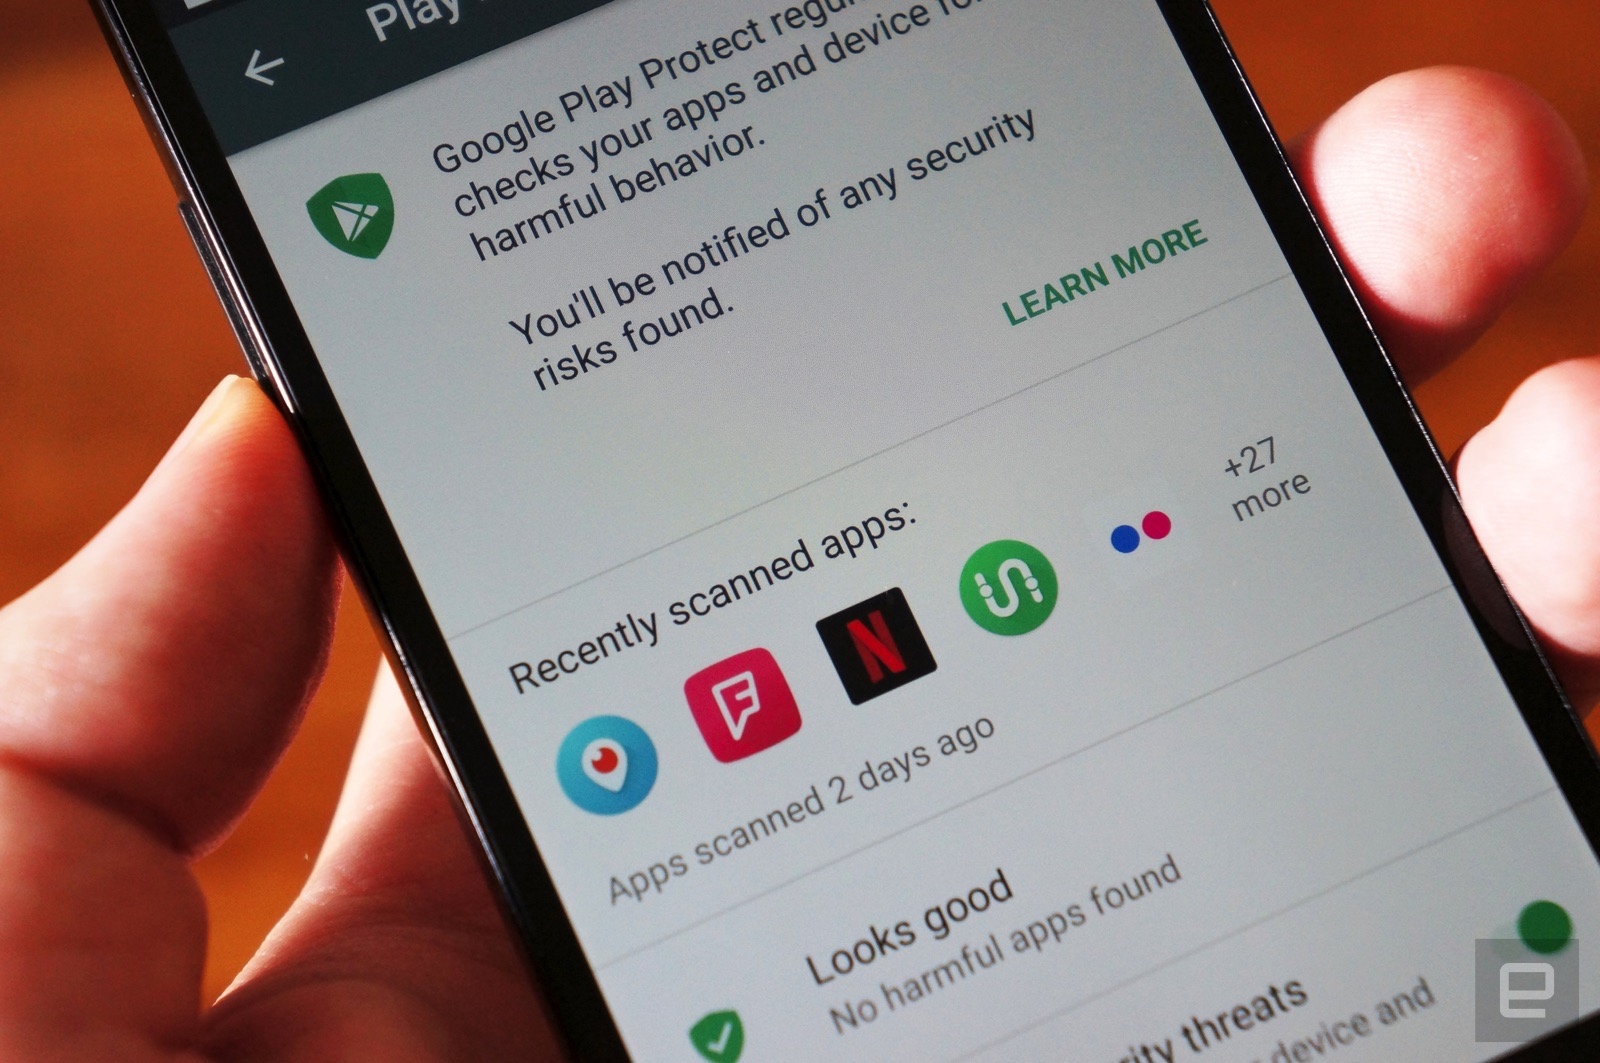 Google will now protect your Android phone from risky apps